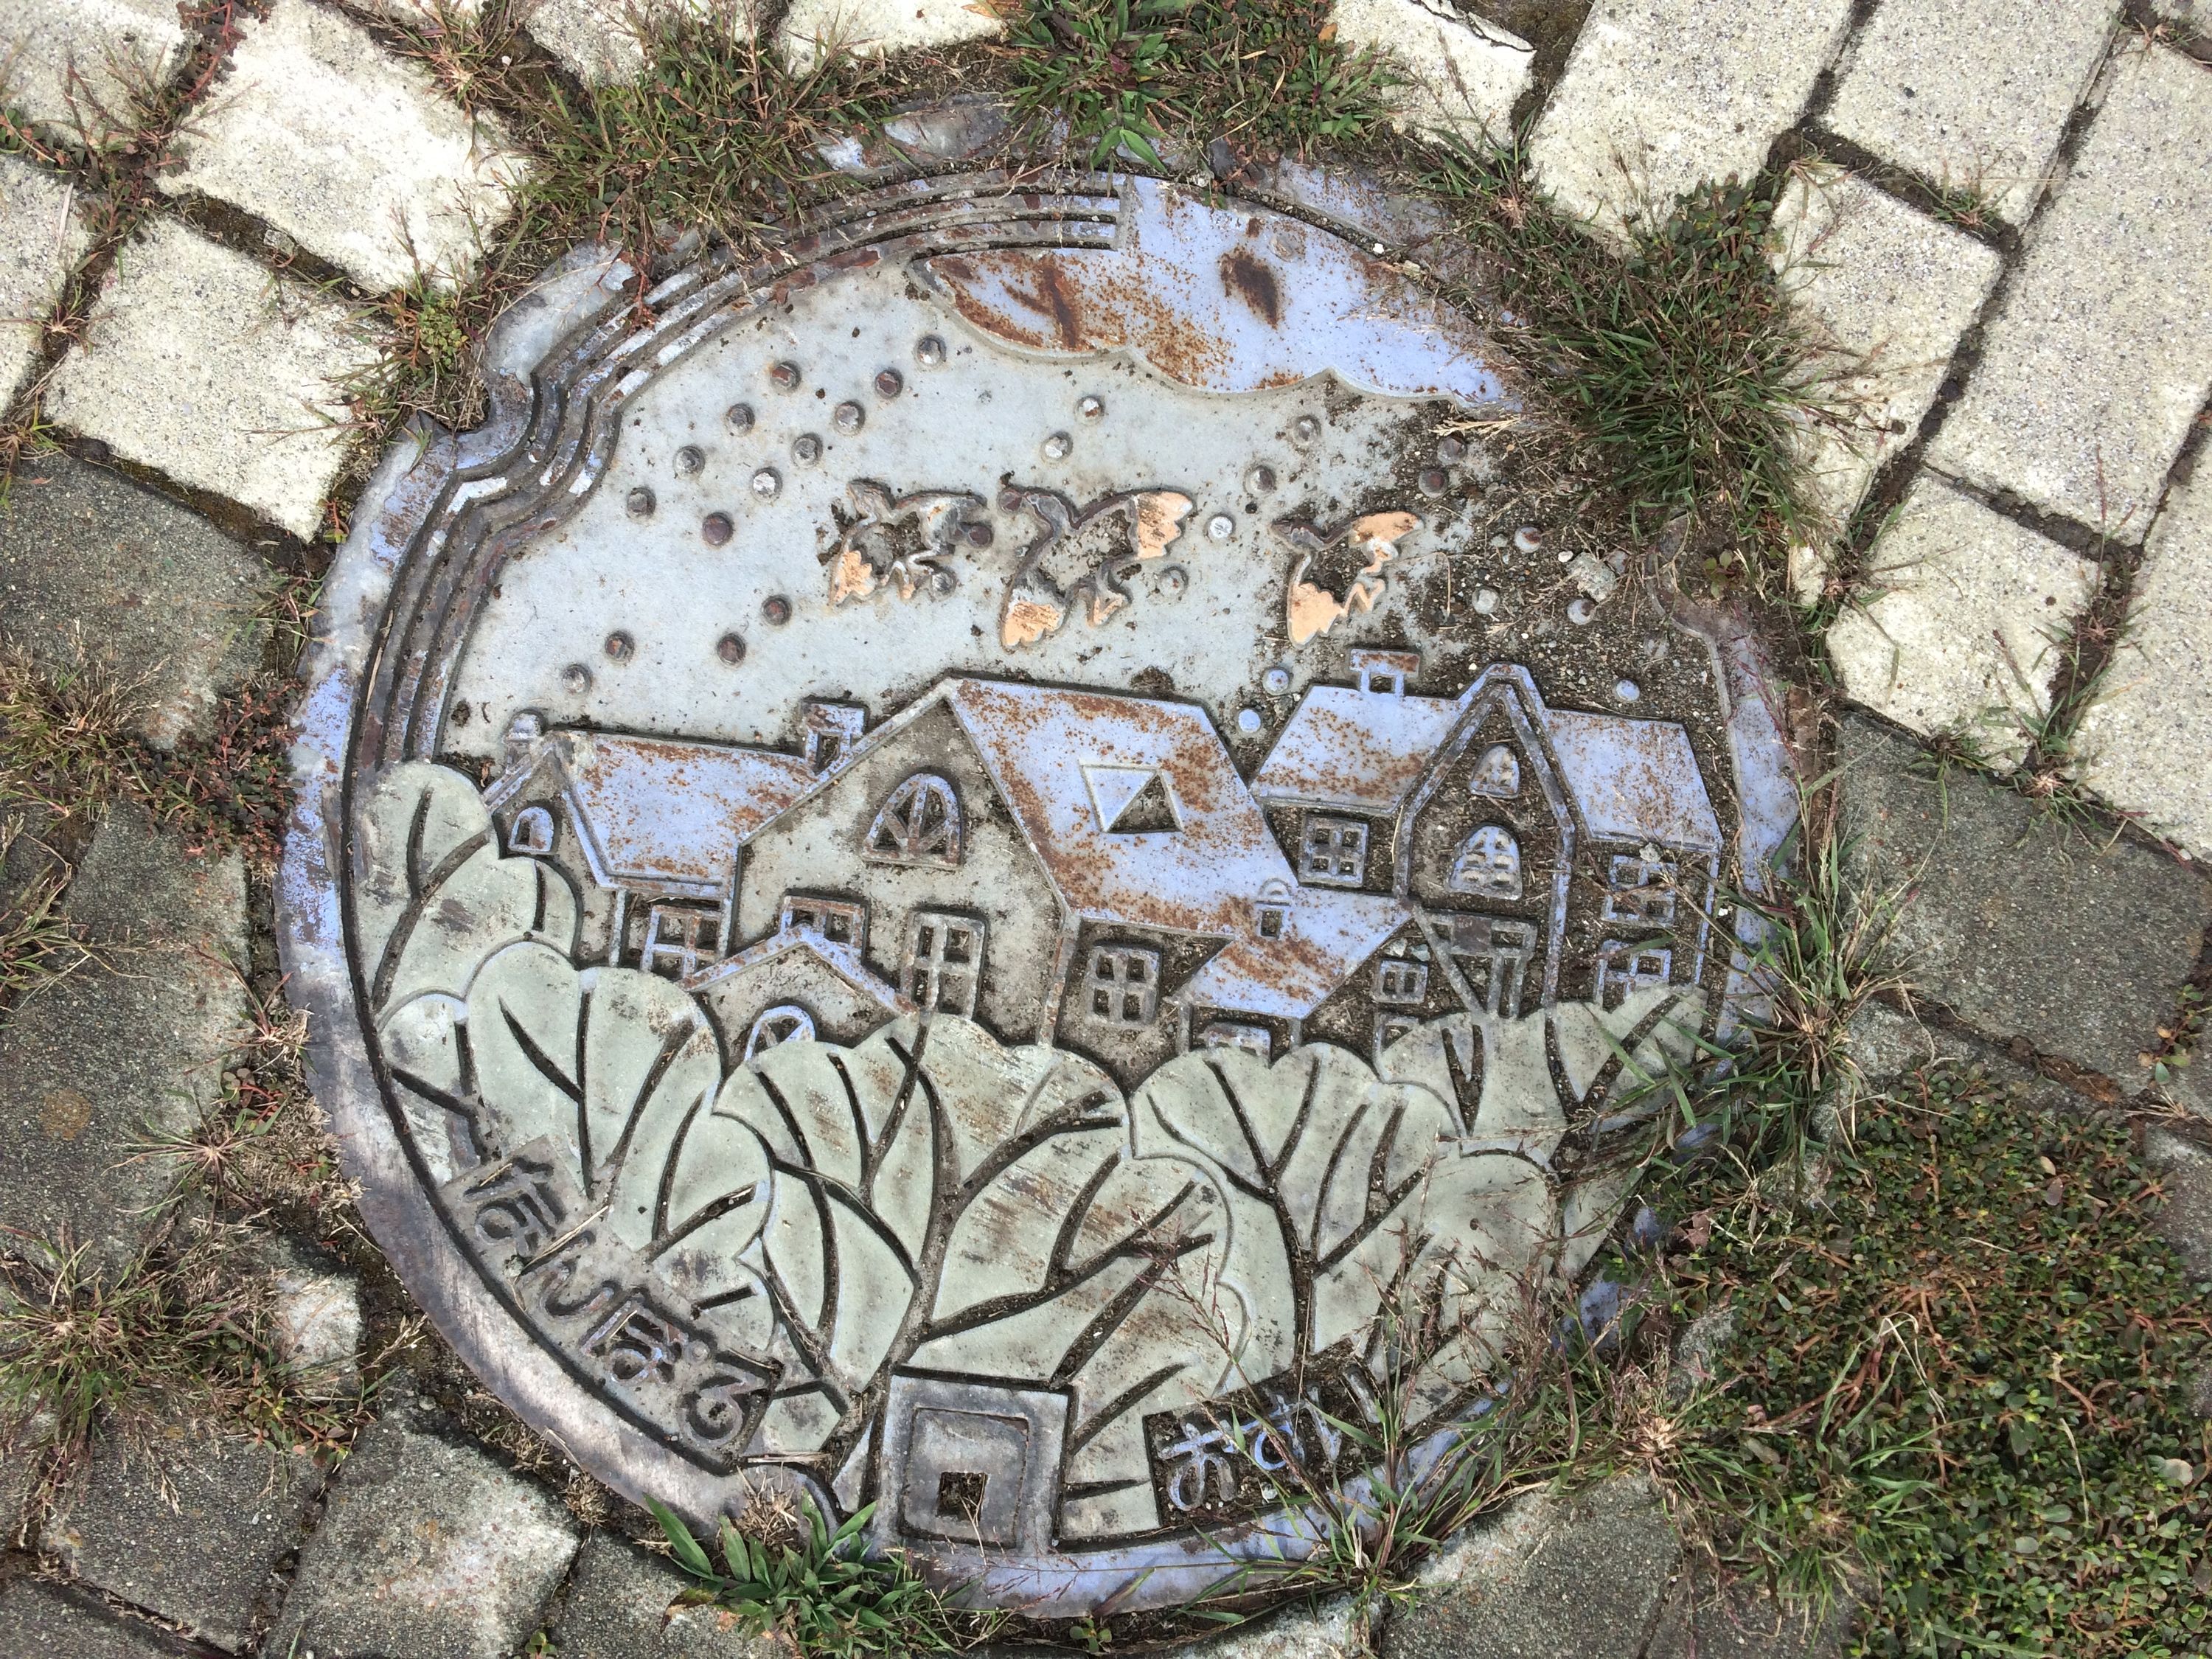 Manhole cover with trees, houses, and birds.